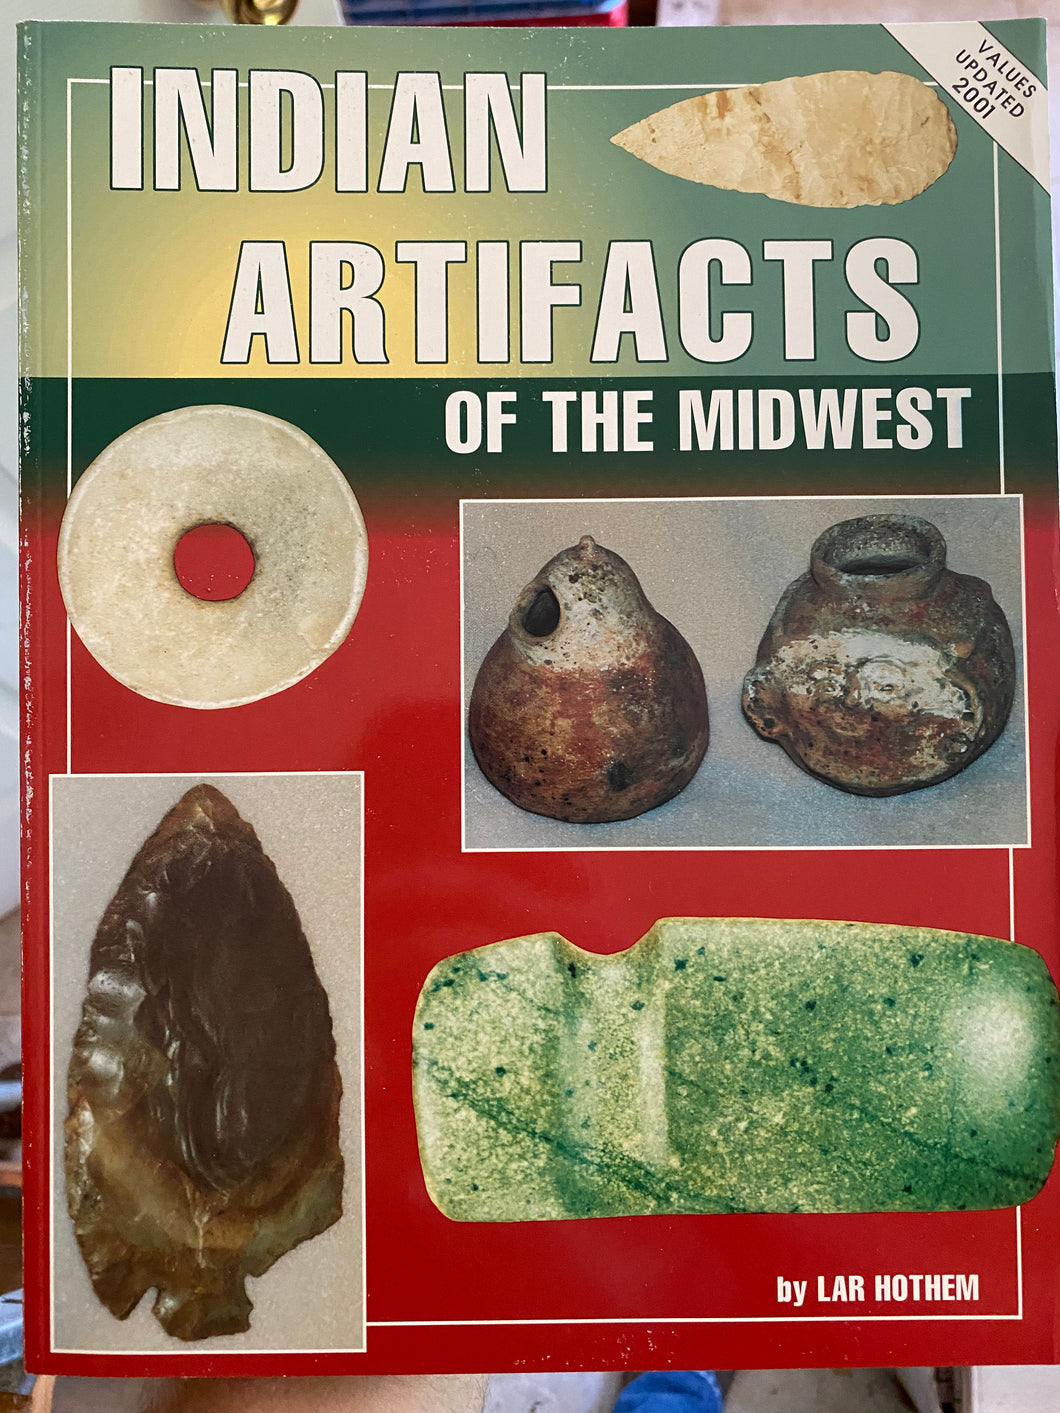 “Indian Artifacts of the Midwest” by Lar Hothem